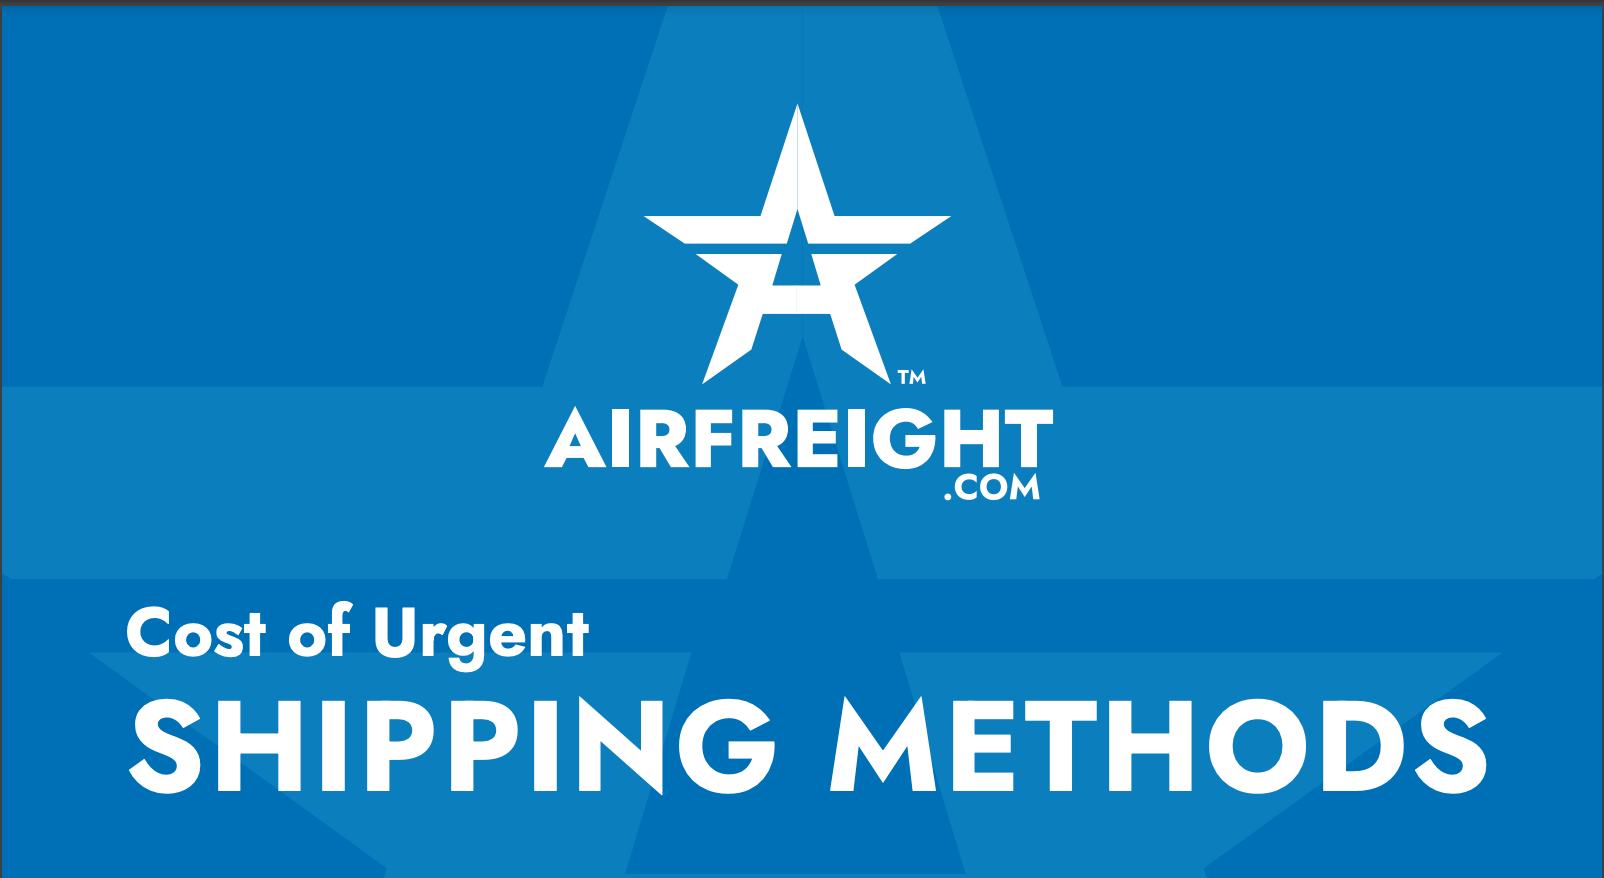 Cost of Urgent Shipping Methods